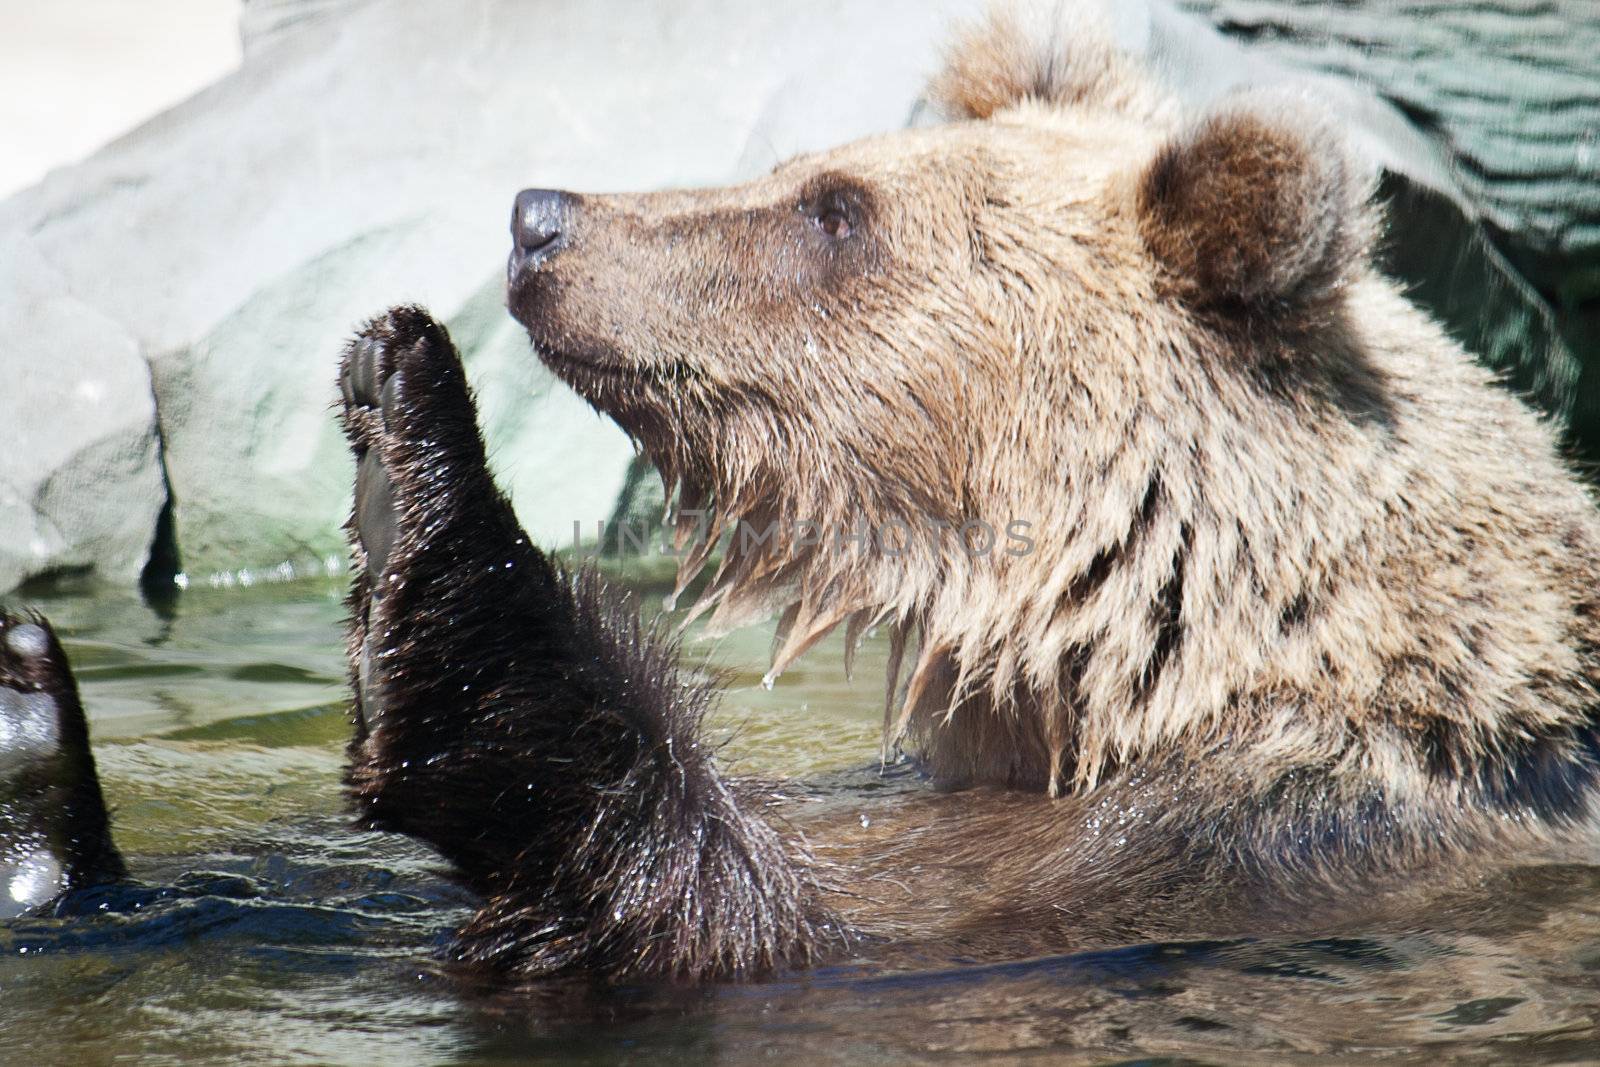 Bear swims in the water at the zoo